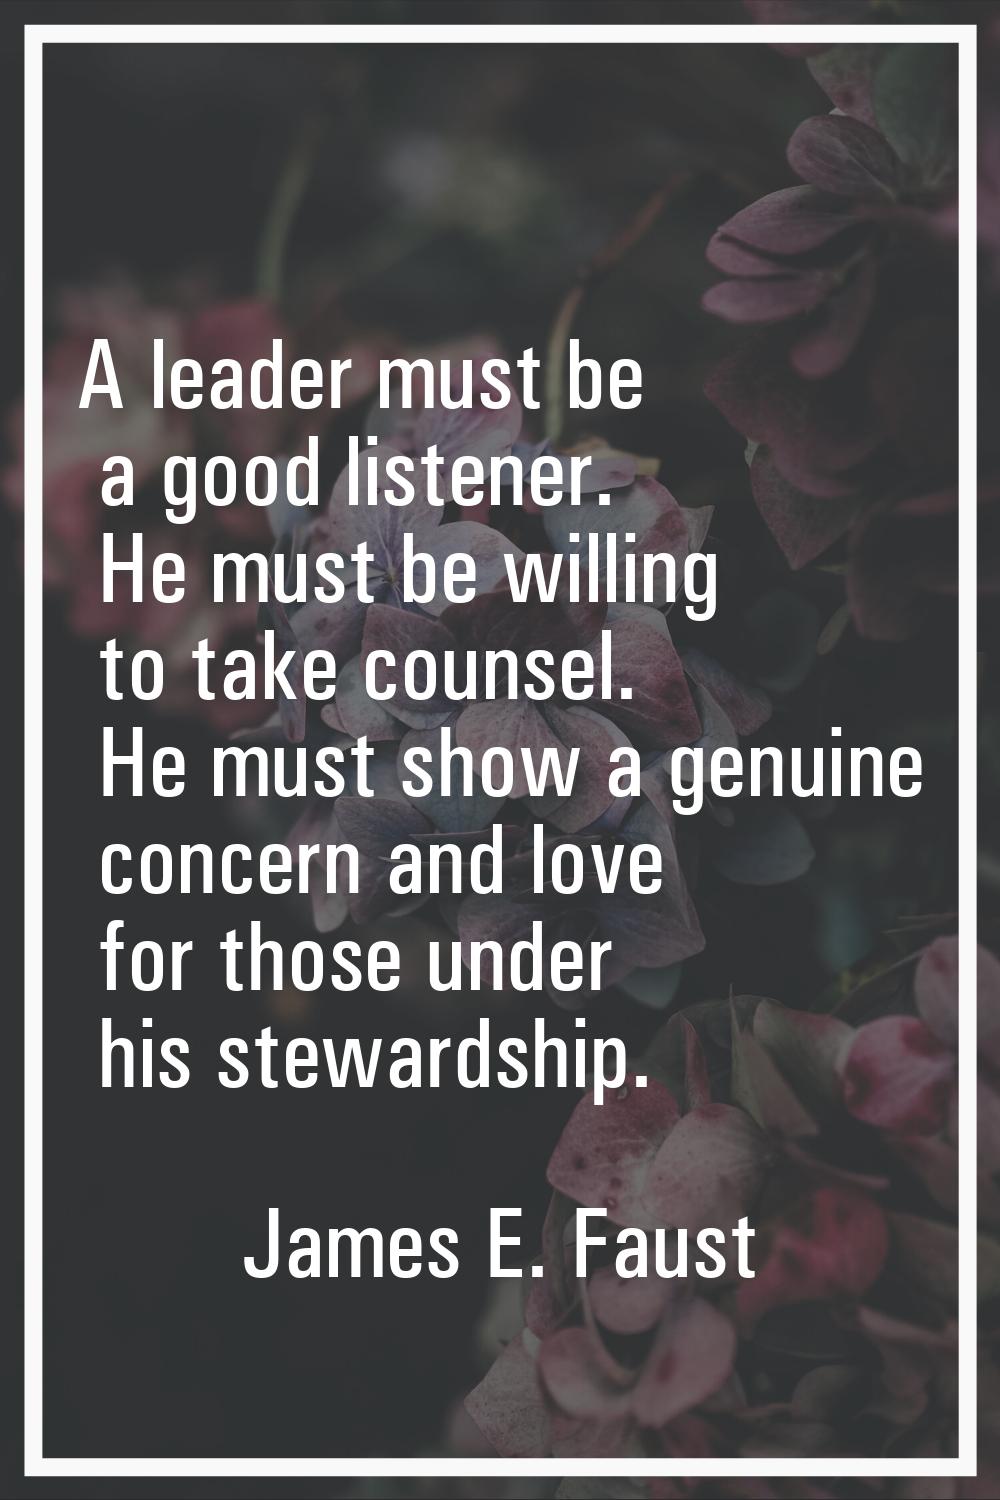 A leader must be a good listener. He must be willing to take counsel. He must show a genuine concer